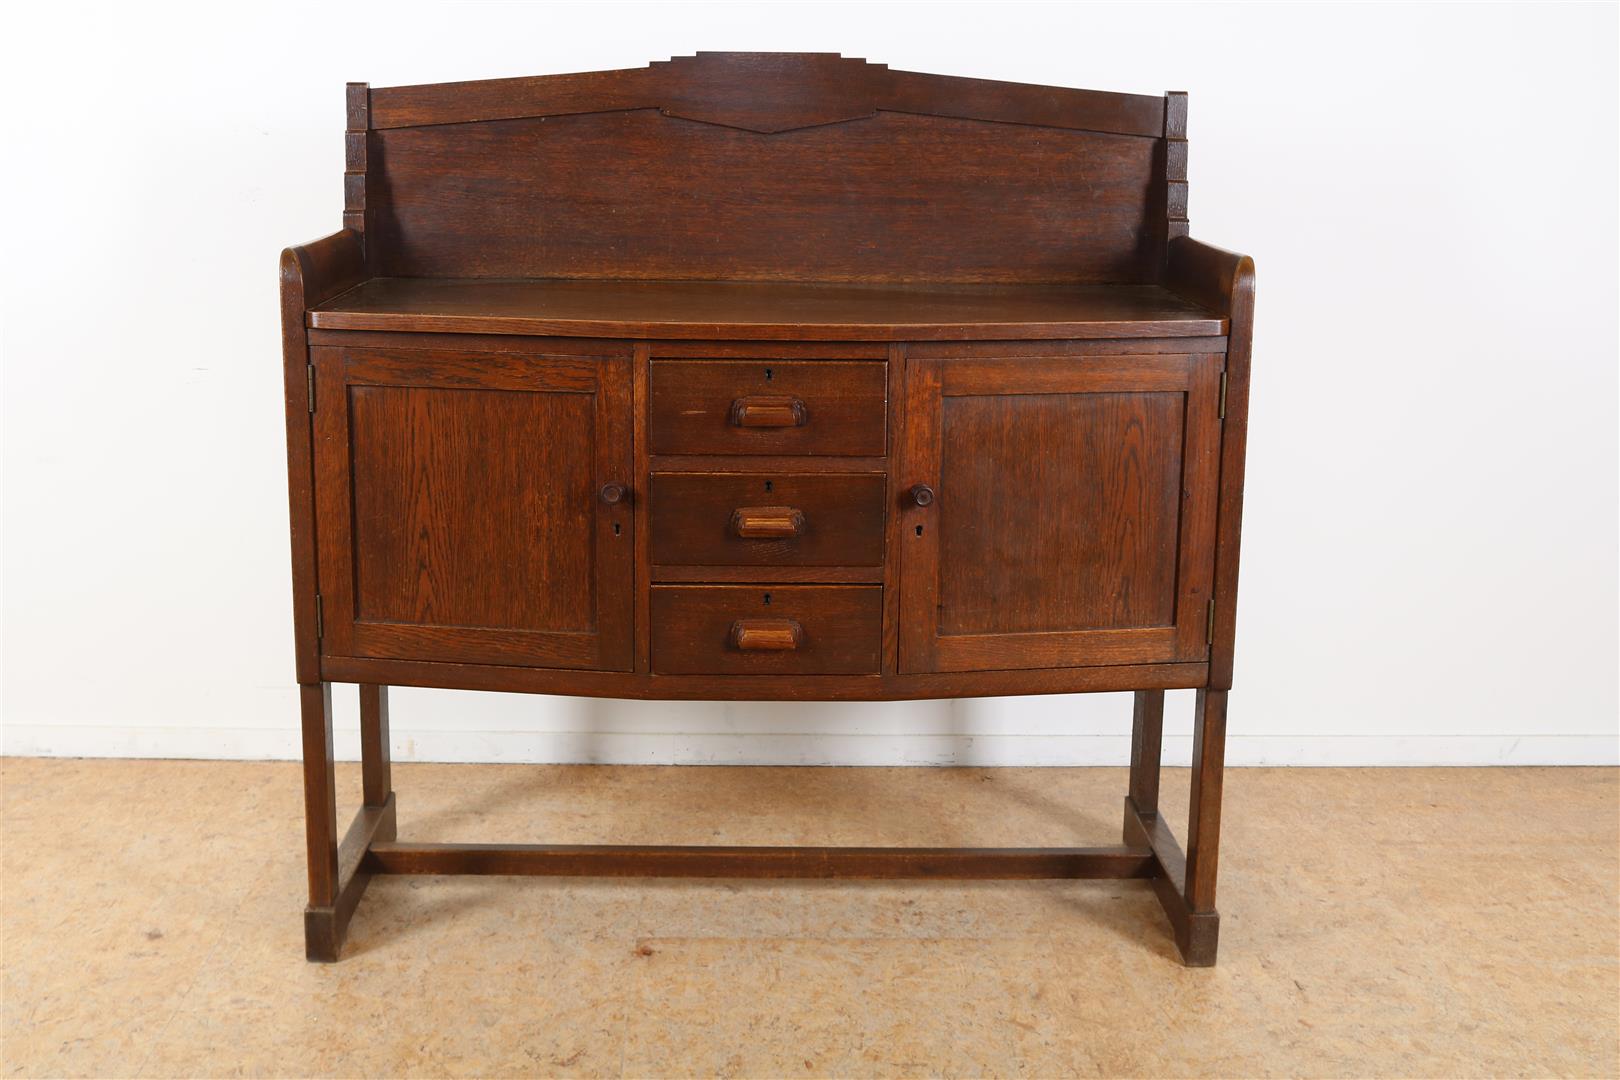 Oak Amsterdam school buffet with upstand, 3 drawers flanked by 2 doors, ca. 1920, 124 x 125 x 58